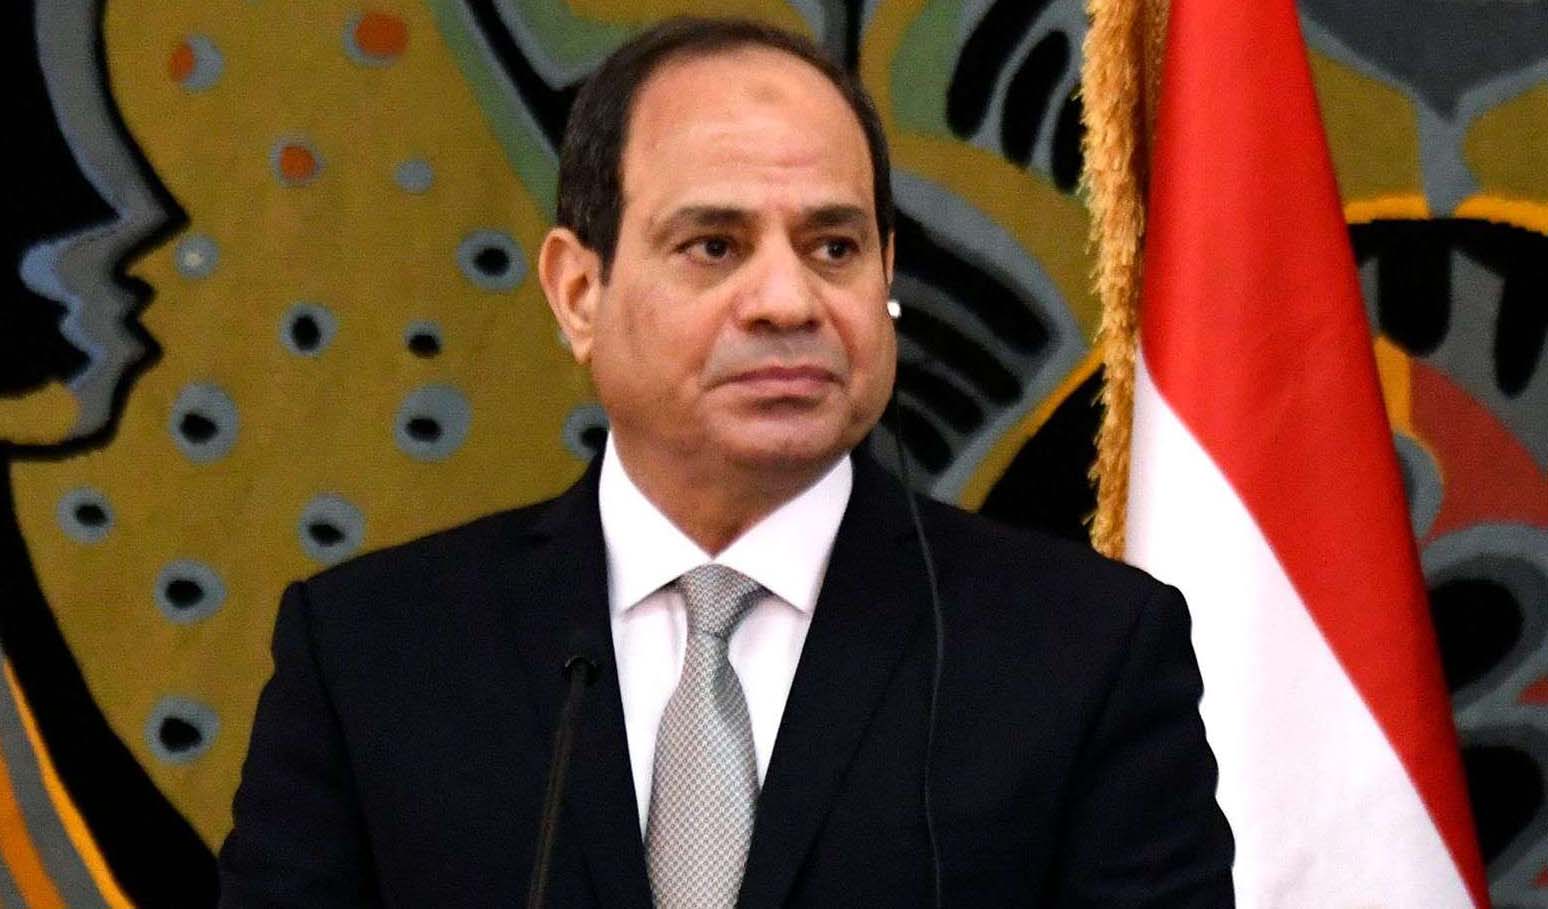 Sisi could stay in power until 2030 